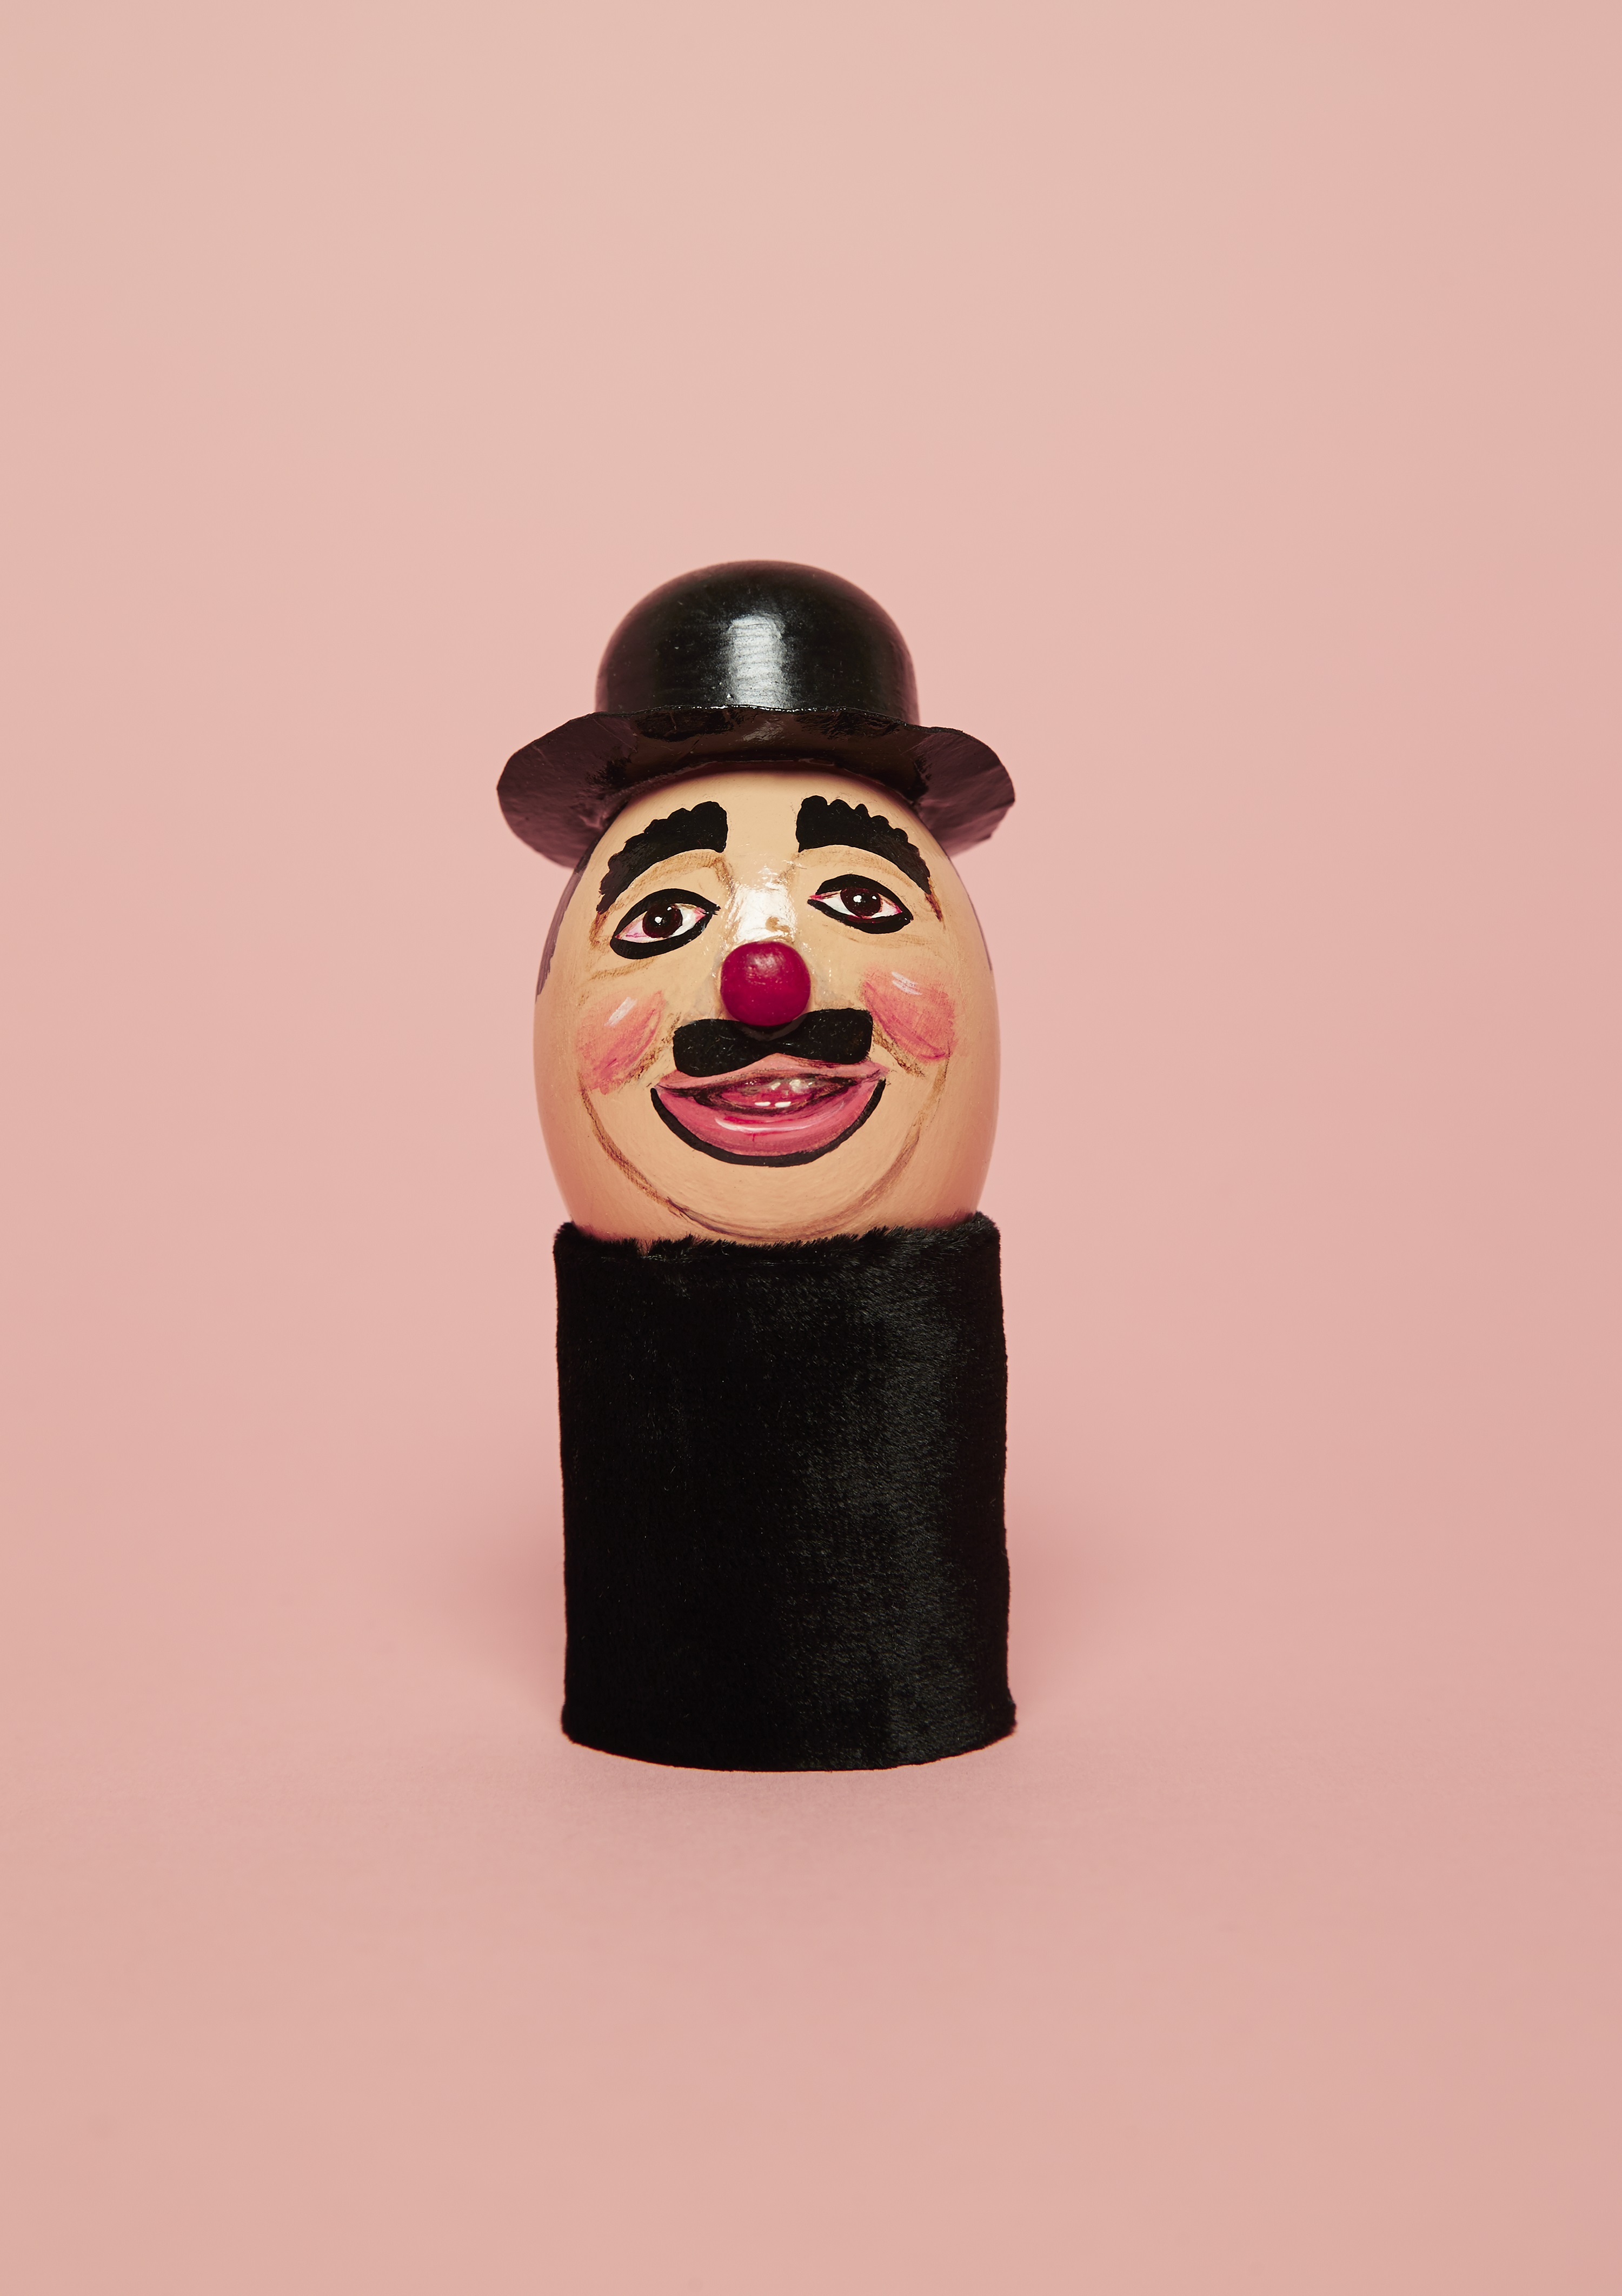 Egg painted with clowns face. The egg has the make up of clown Charlie Cairoli painted on it, it wears black bowler hat and is sitting on black tube in front of peach background. The Photograph is part of the clown egg register, a visual history of registered clown performers make up by Luke Stephenson Photograph included in the exhibition A Clown Walks Into A Gallery…